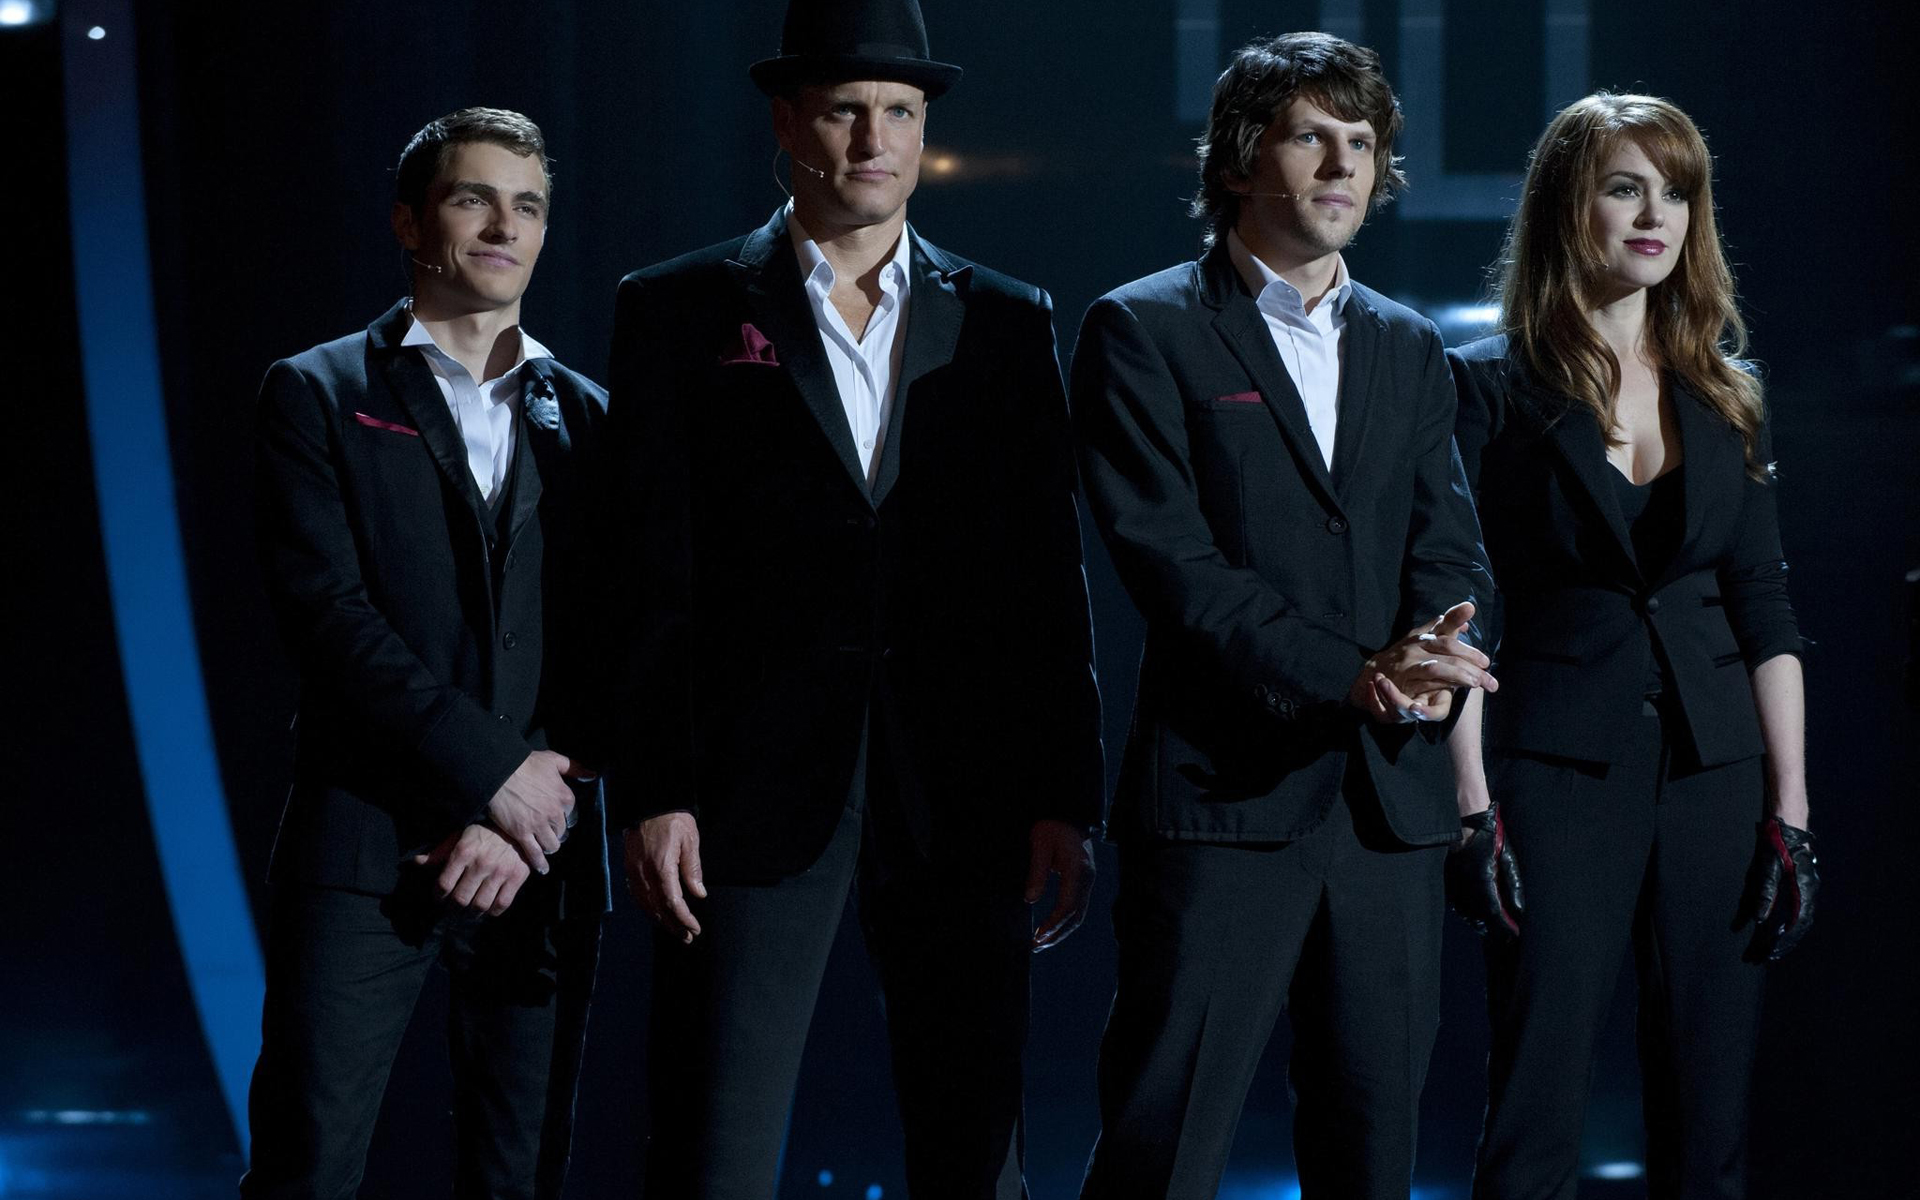 now you see me wallpaper,suit,formal wear,tuxedo,event,performance